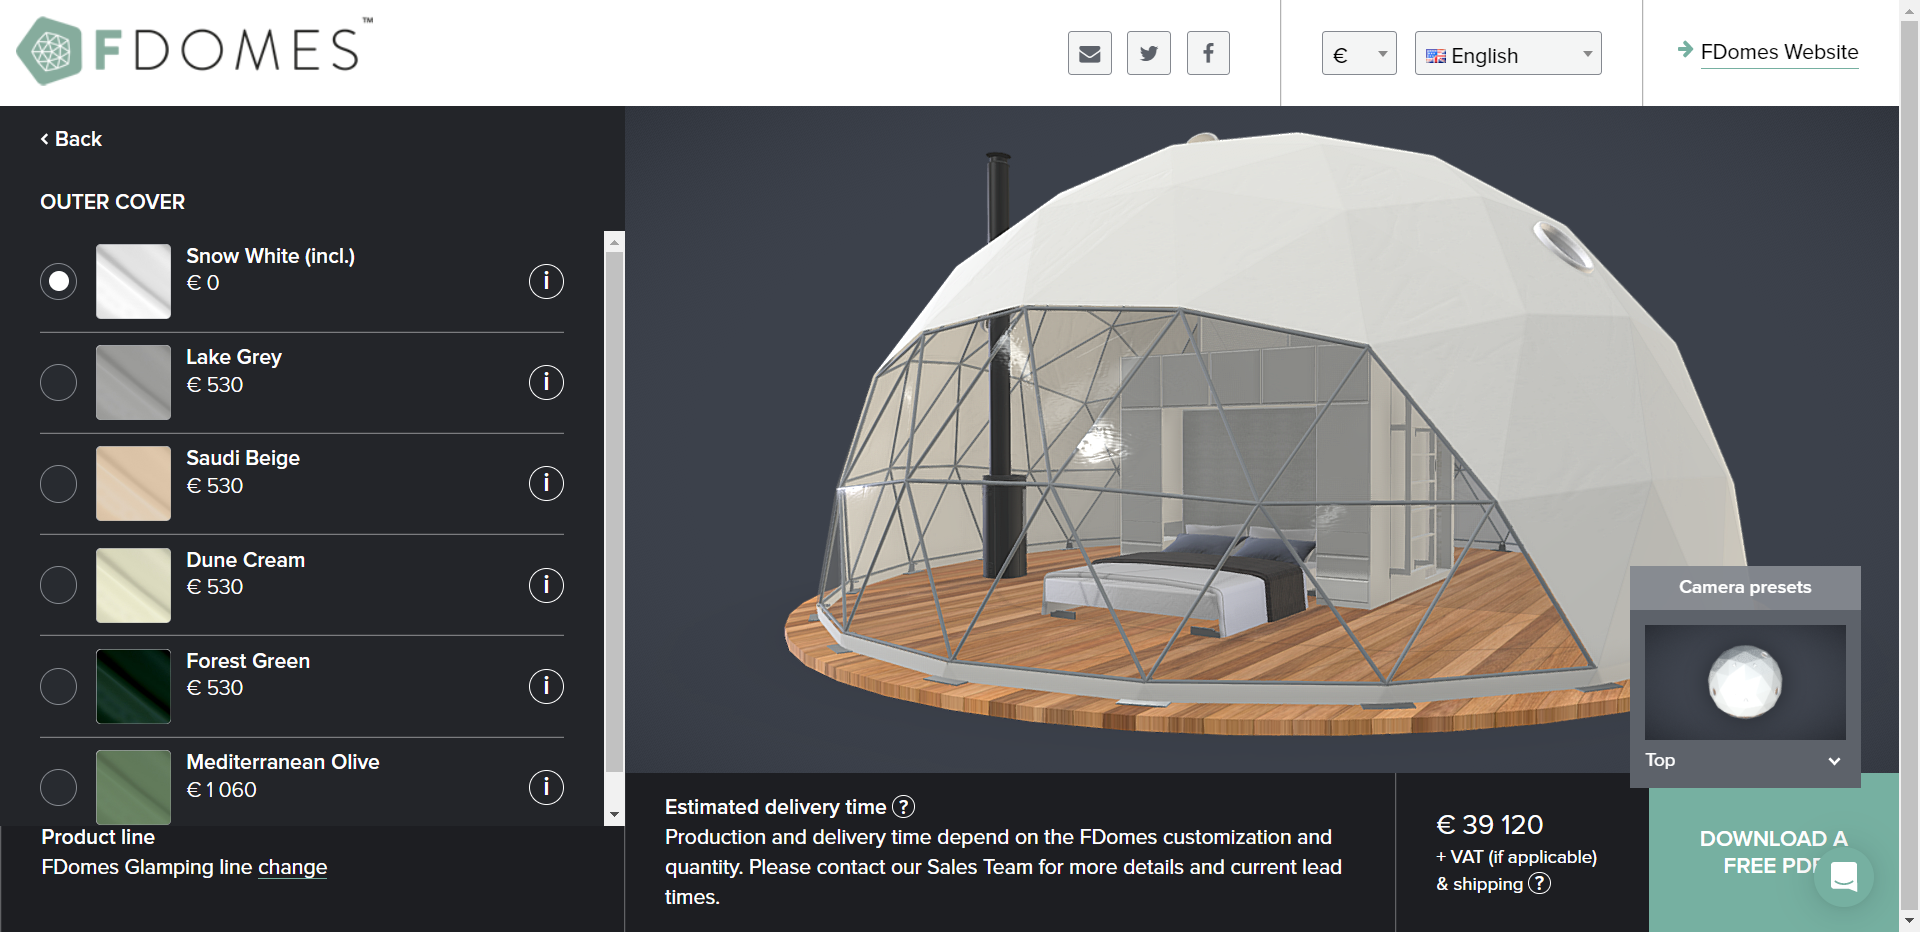 Geodesic-Dome-Kits-for-Business-and-Pleasure-by-FDomes (2)